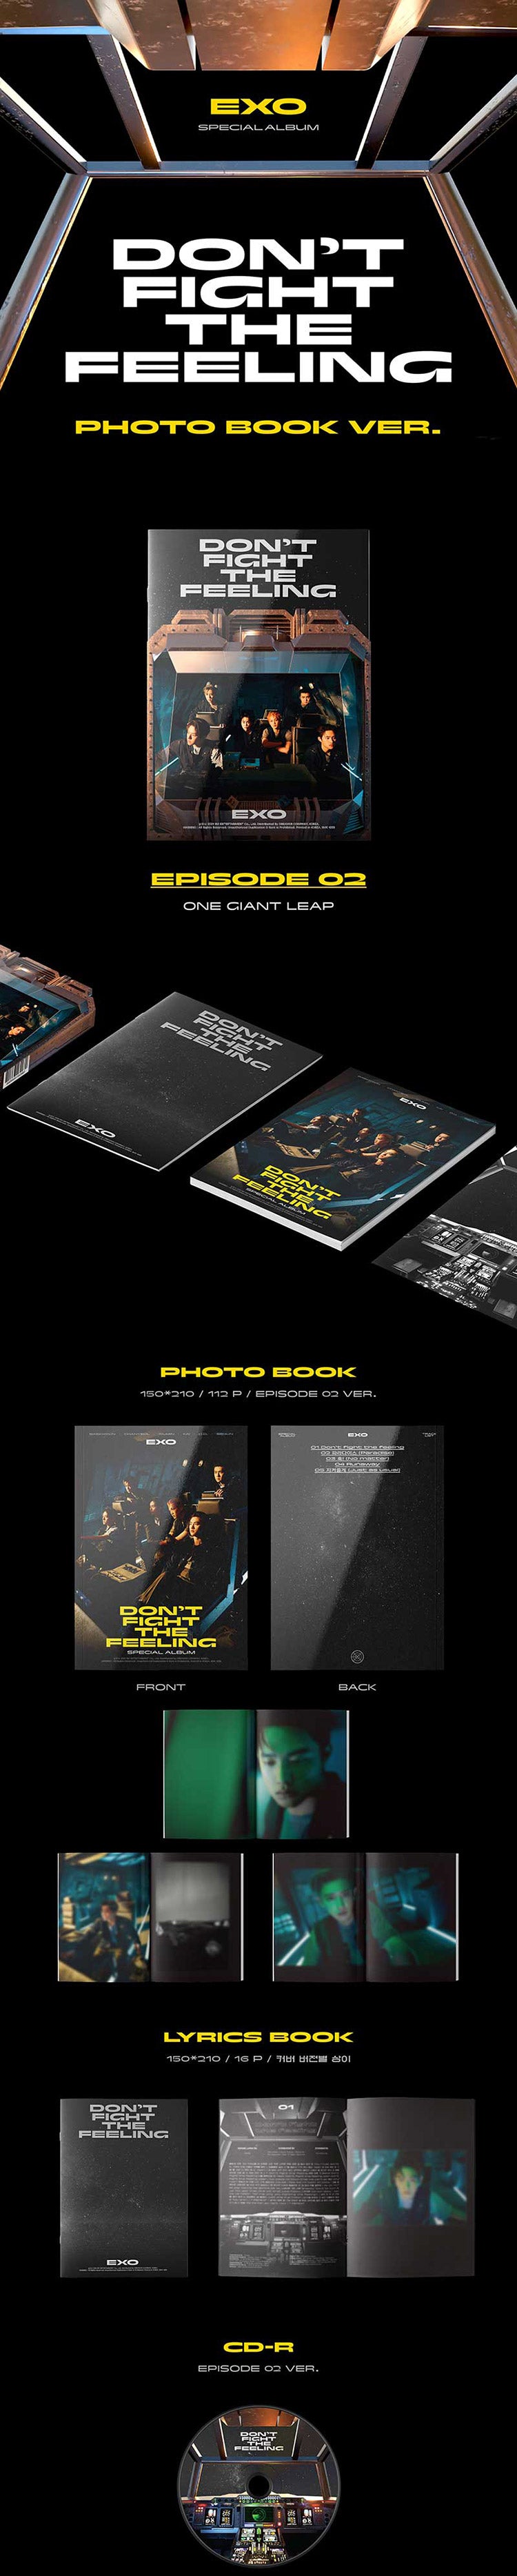 EXO - Special Album [Don't Fight The Feeling] Photo Book Ver.2